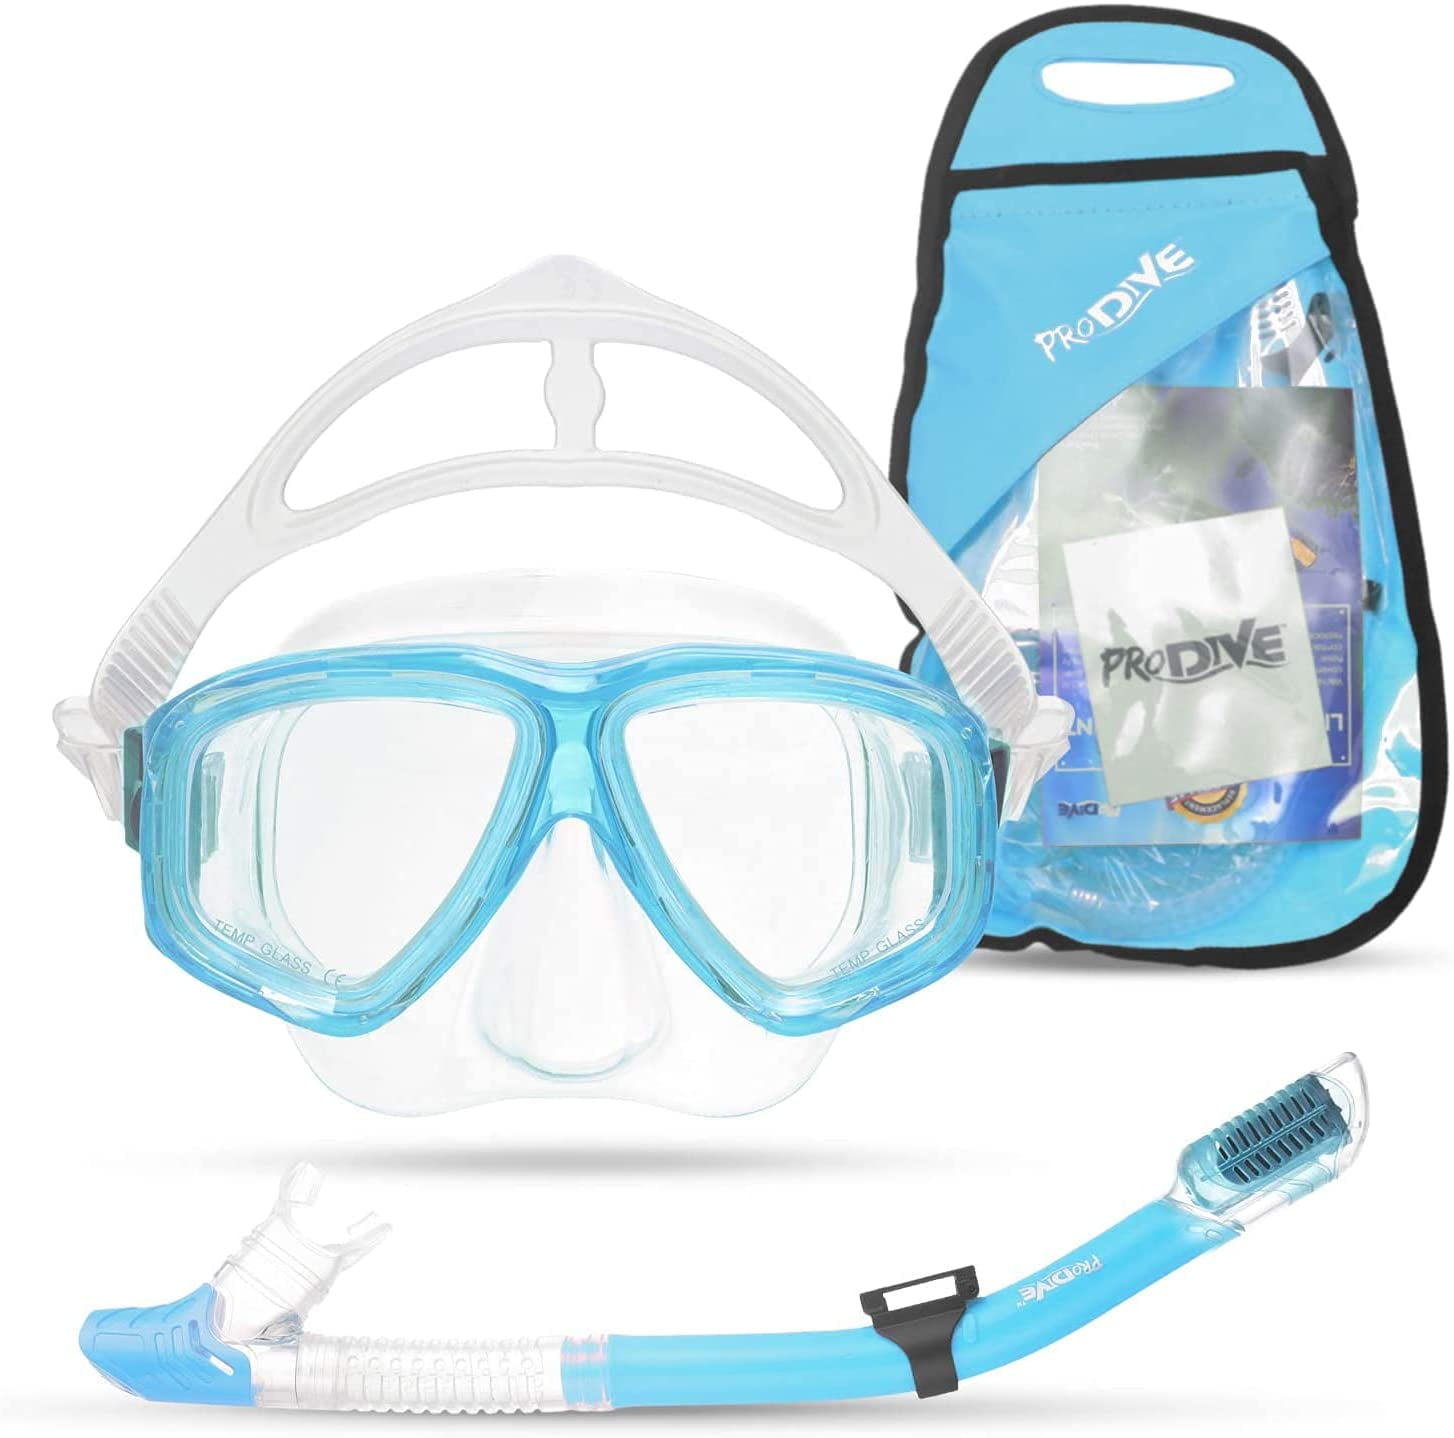 Prodive Premium Dry Top Snorkel Set - Impact Resistant Tempered Glass Diving Mask - Watertight and Anti-Fog Lens for Best - Easy Adjustable Strap - Waterproof Gear Bag Included (Aqua, Kids) -